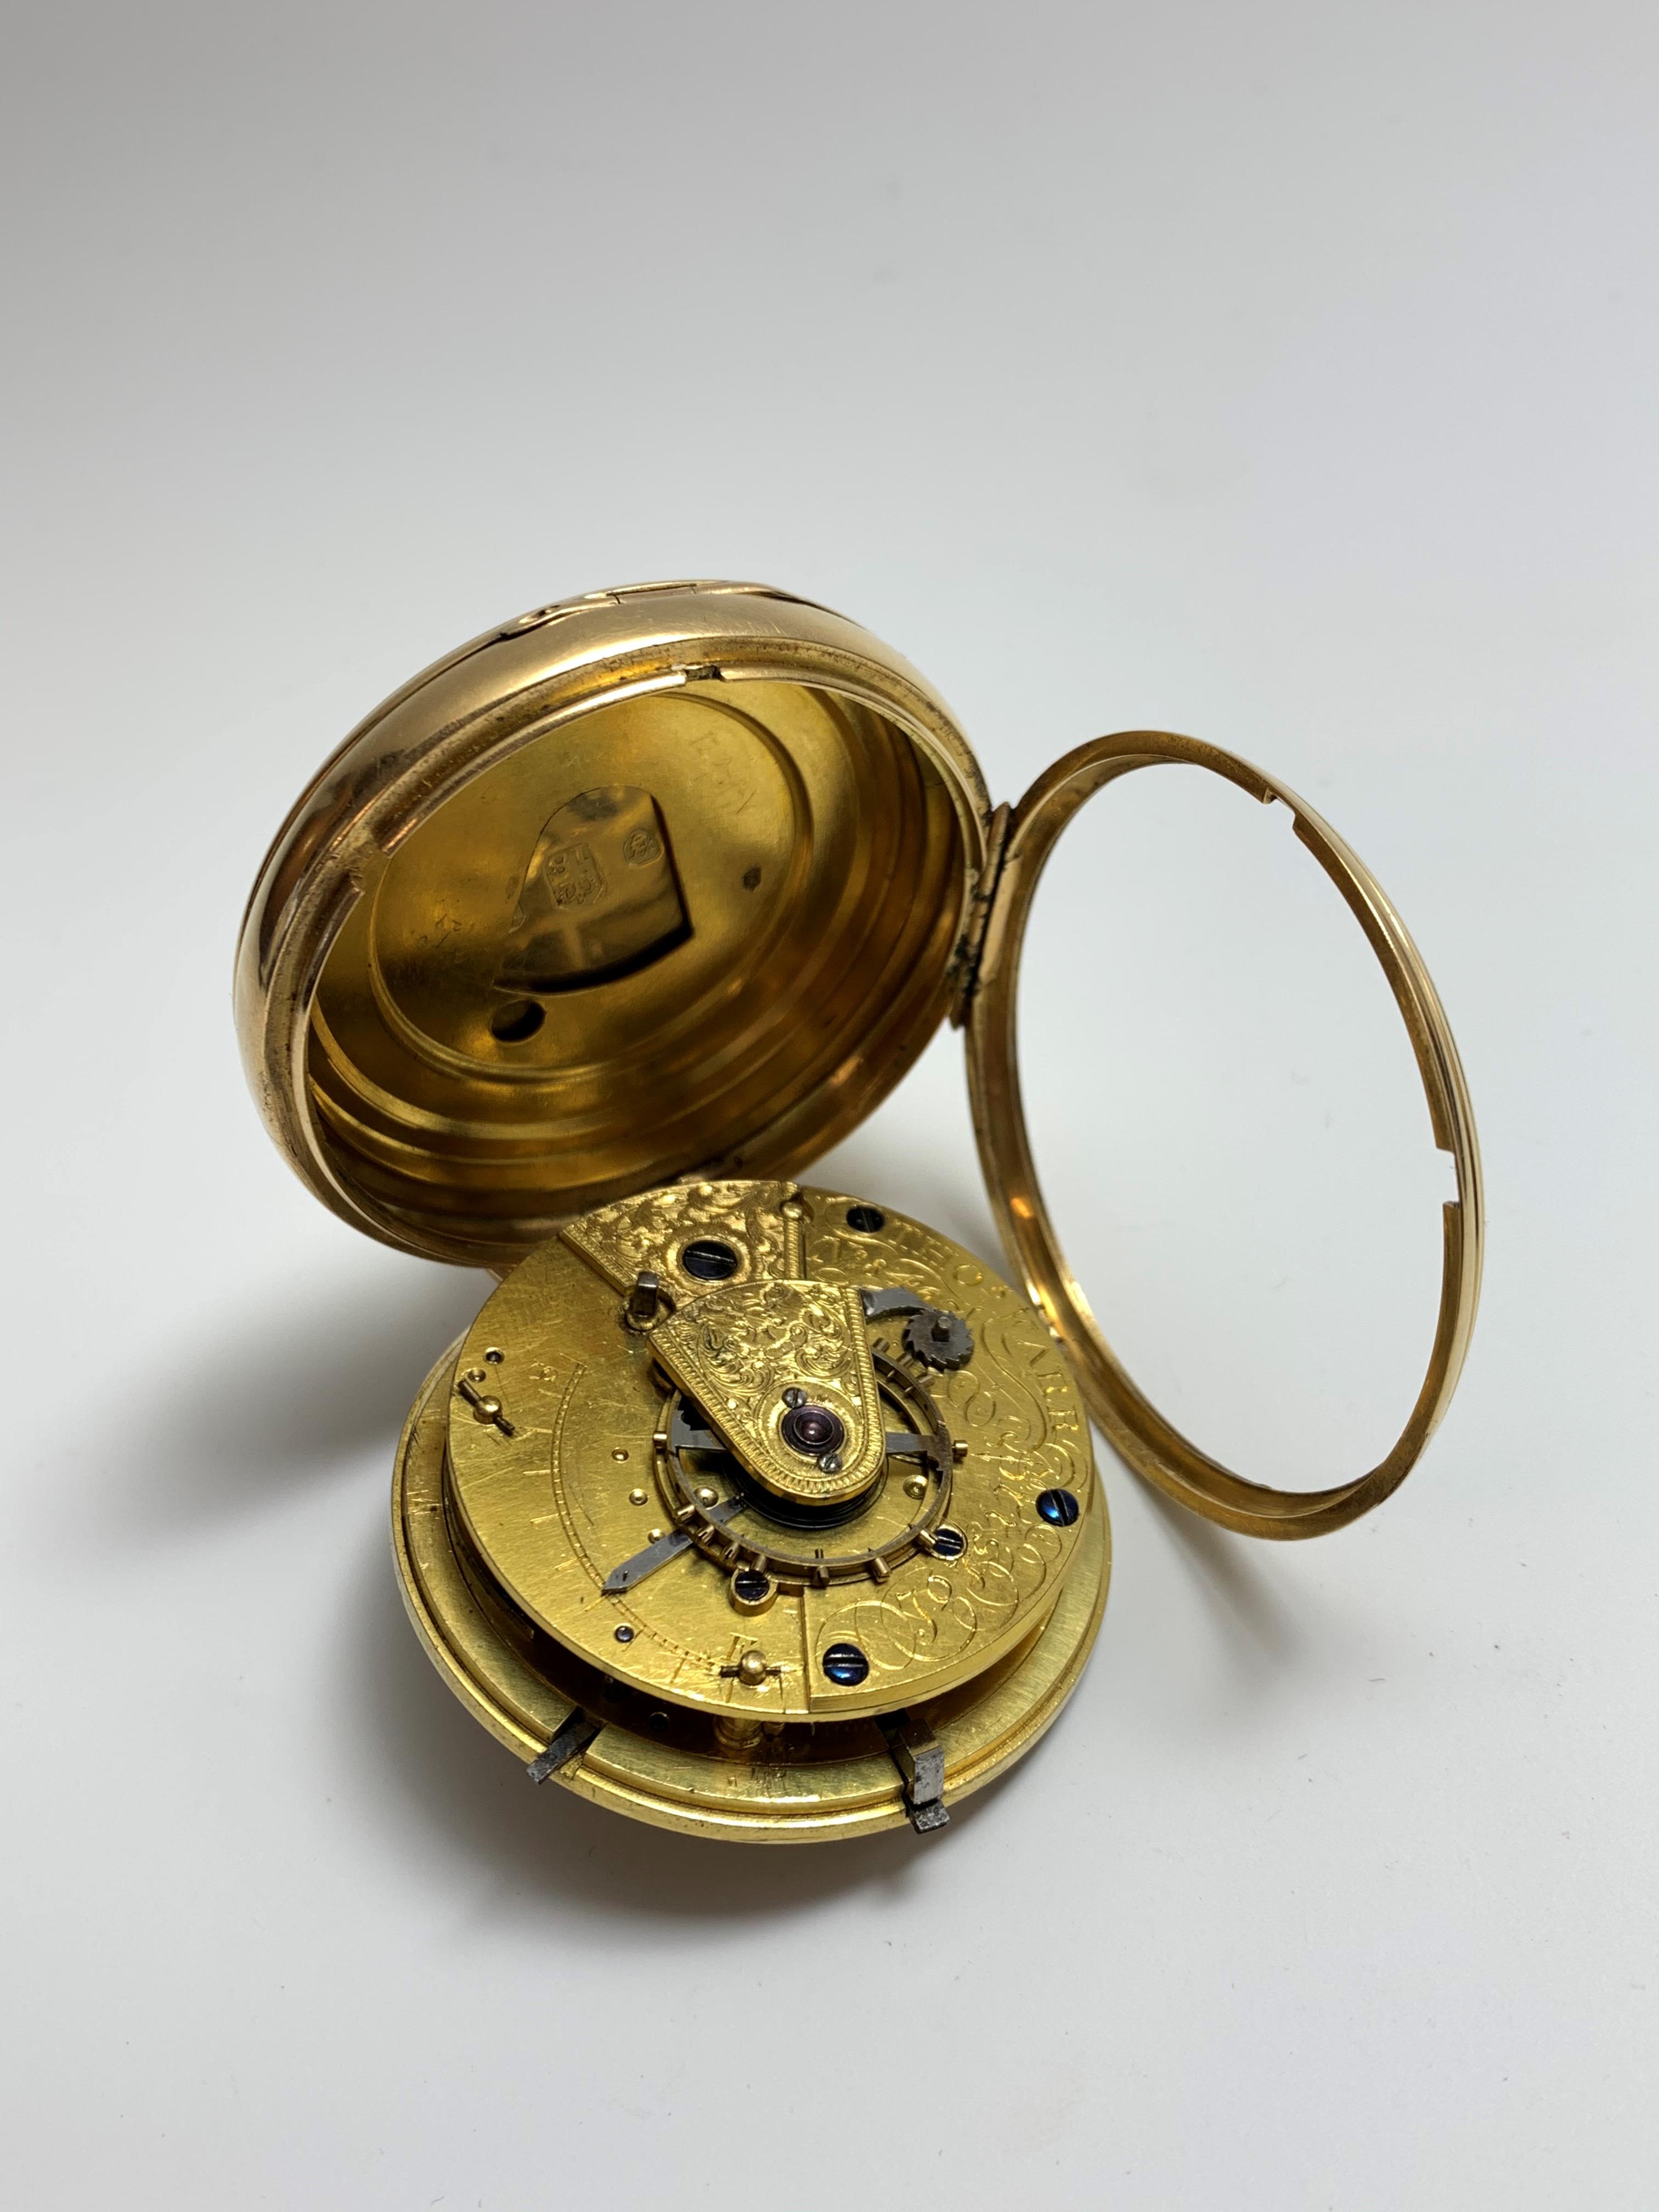 A fine and large George III 18ct Gold Keywind open face pocket watch by Thomas Farr, Bristol - Image 3 of 13